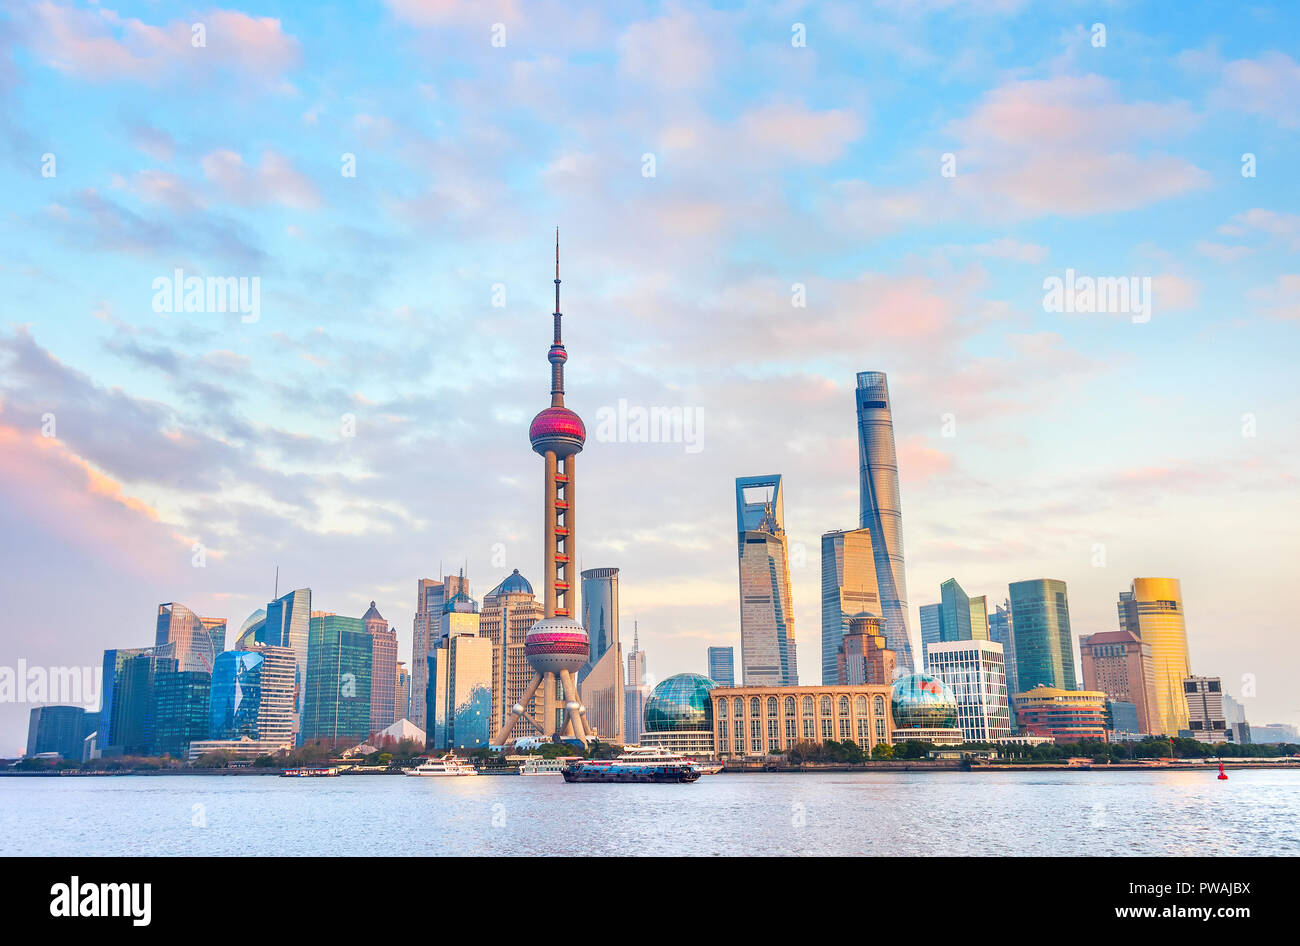 Colorful sunset over Shanghai metropolis embankment with buildings of modern architecture, skyscrapers and famous tv tower, China Stock Photo